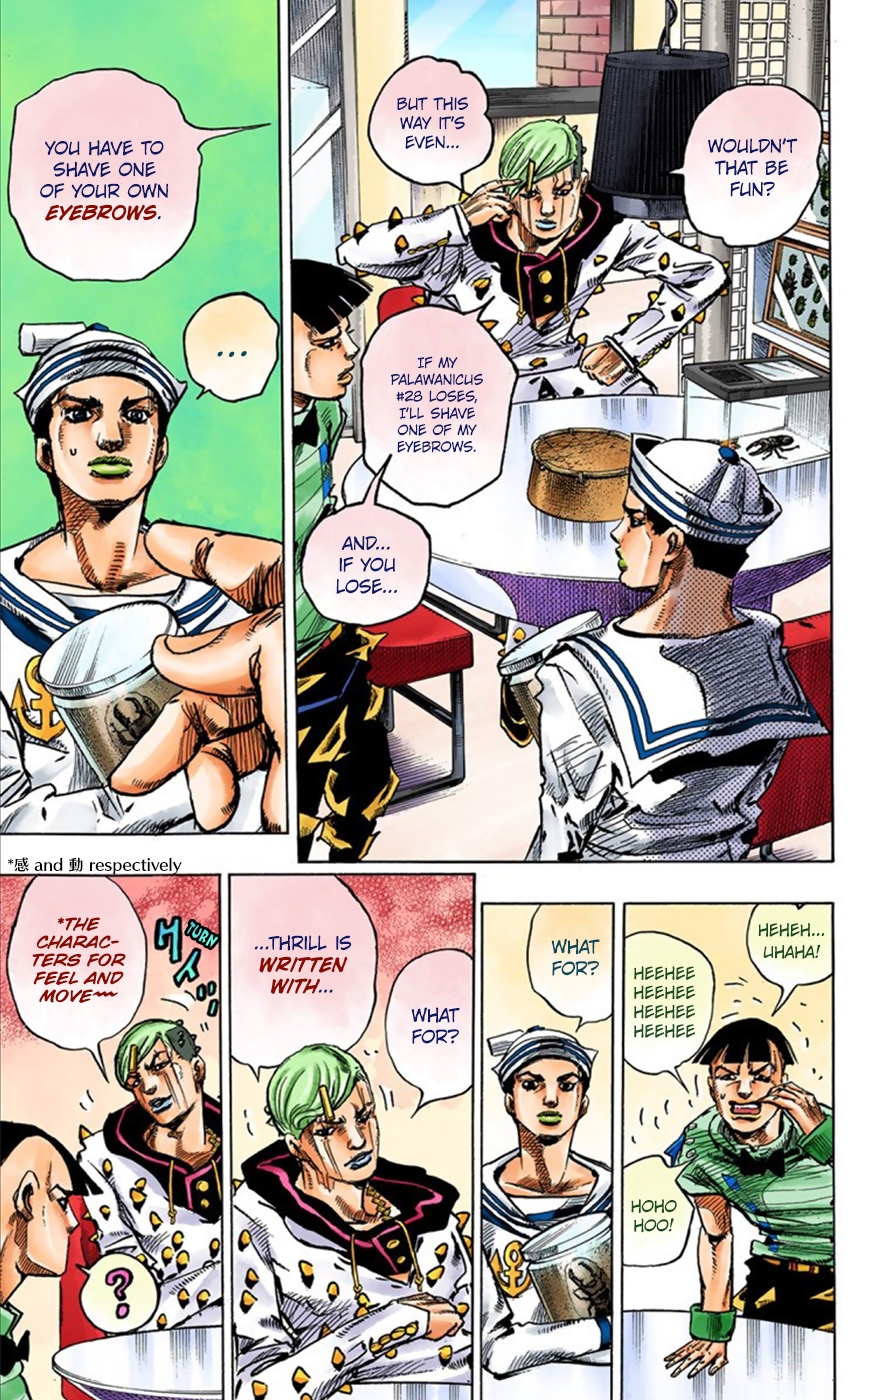 JoJo's Bizarre Adventure Part 8 JoJolion [Official Colored] Vol. 9 Ch. 35 Every Day is a Summer Vacation Part 2